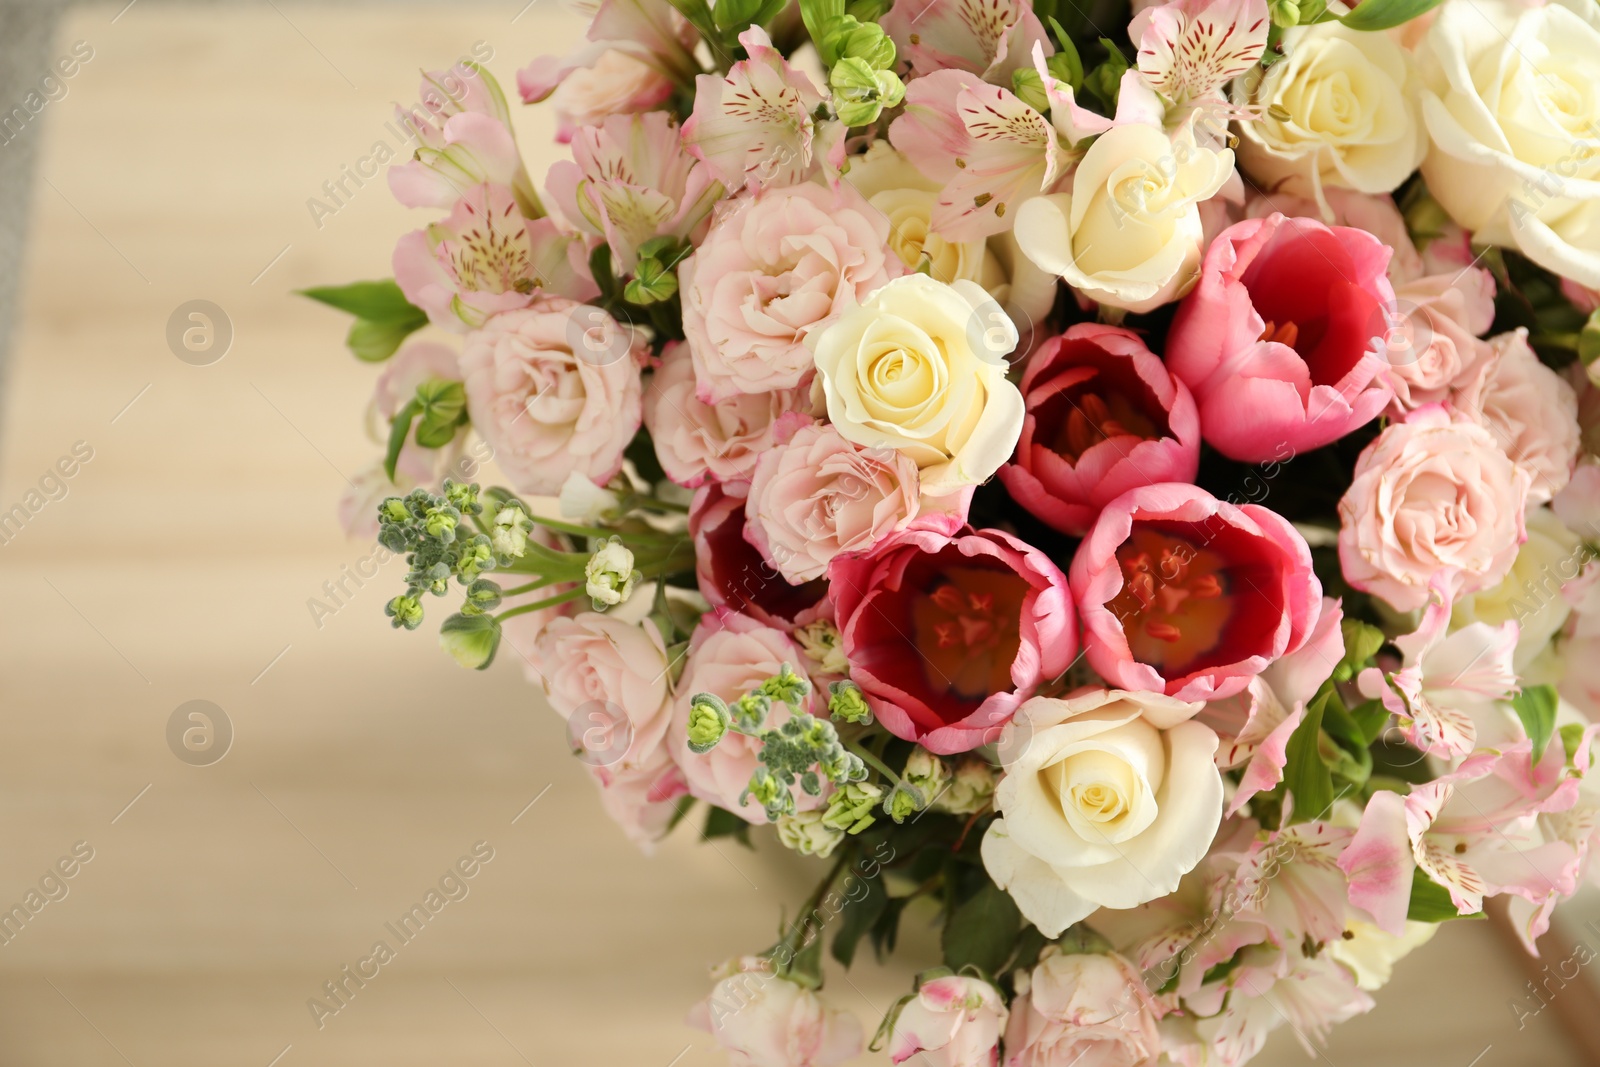 Photo of Beautiful bouquet of fresh flowers on table indoors, closeup